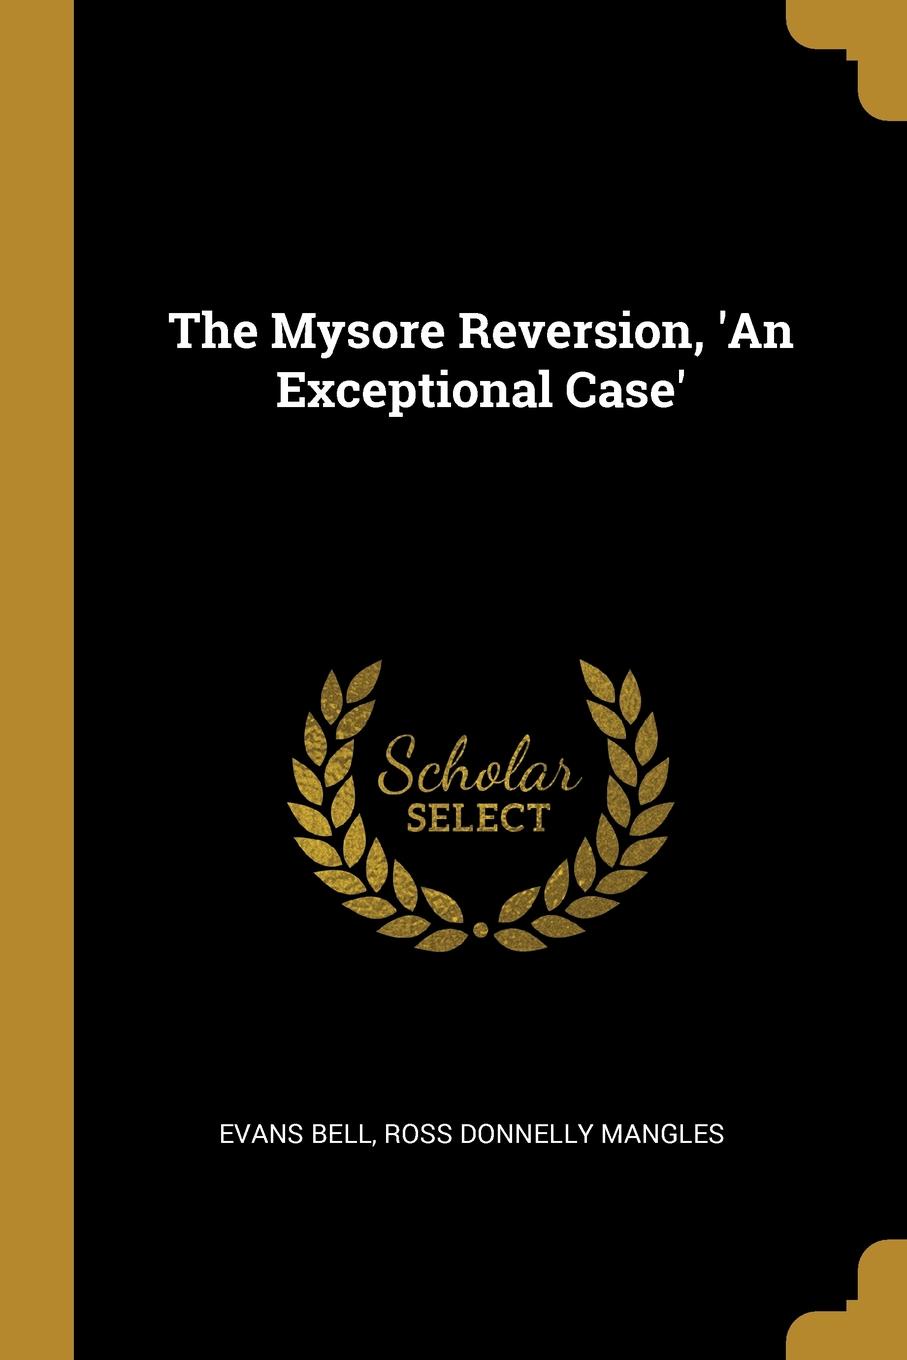 The Mysore Reversion, .An Exceptional Case.